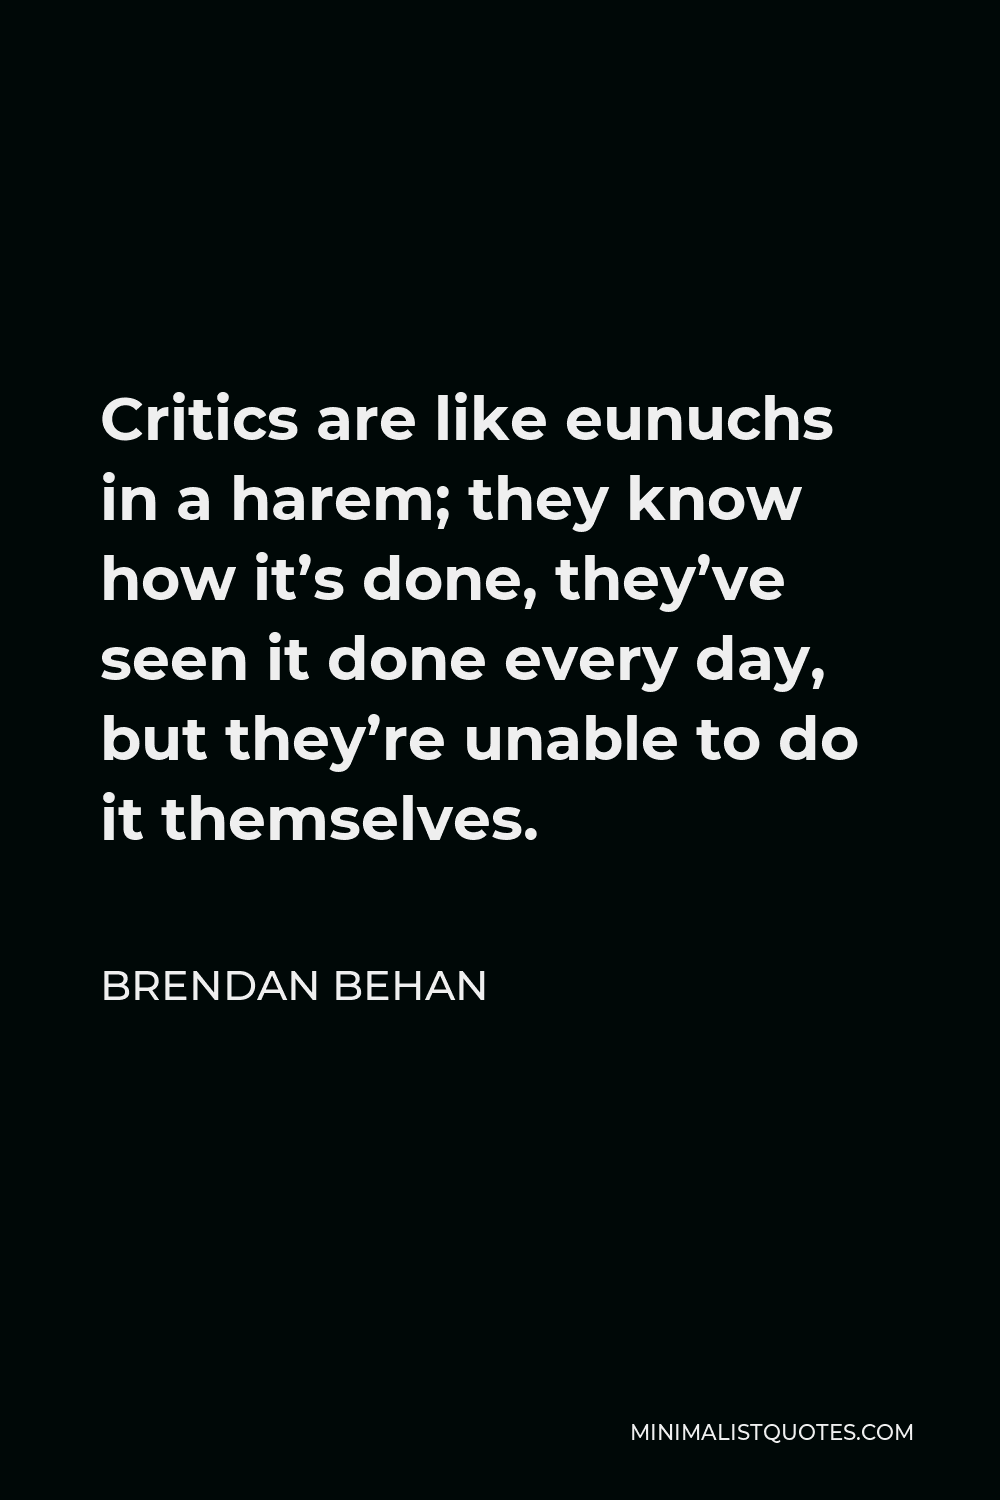 Brendan Behan Quote - Critics are like eunuchs in a harem; they know how it’s done, they’ve seen it done every day, but they’re unable to do it themselves.